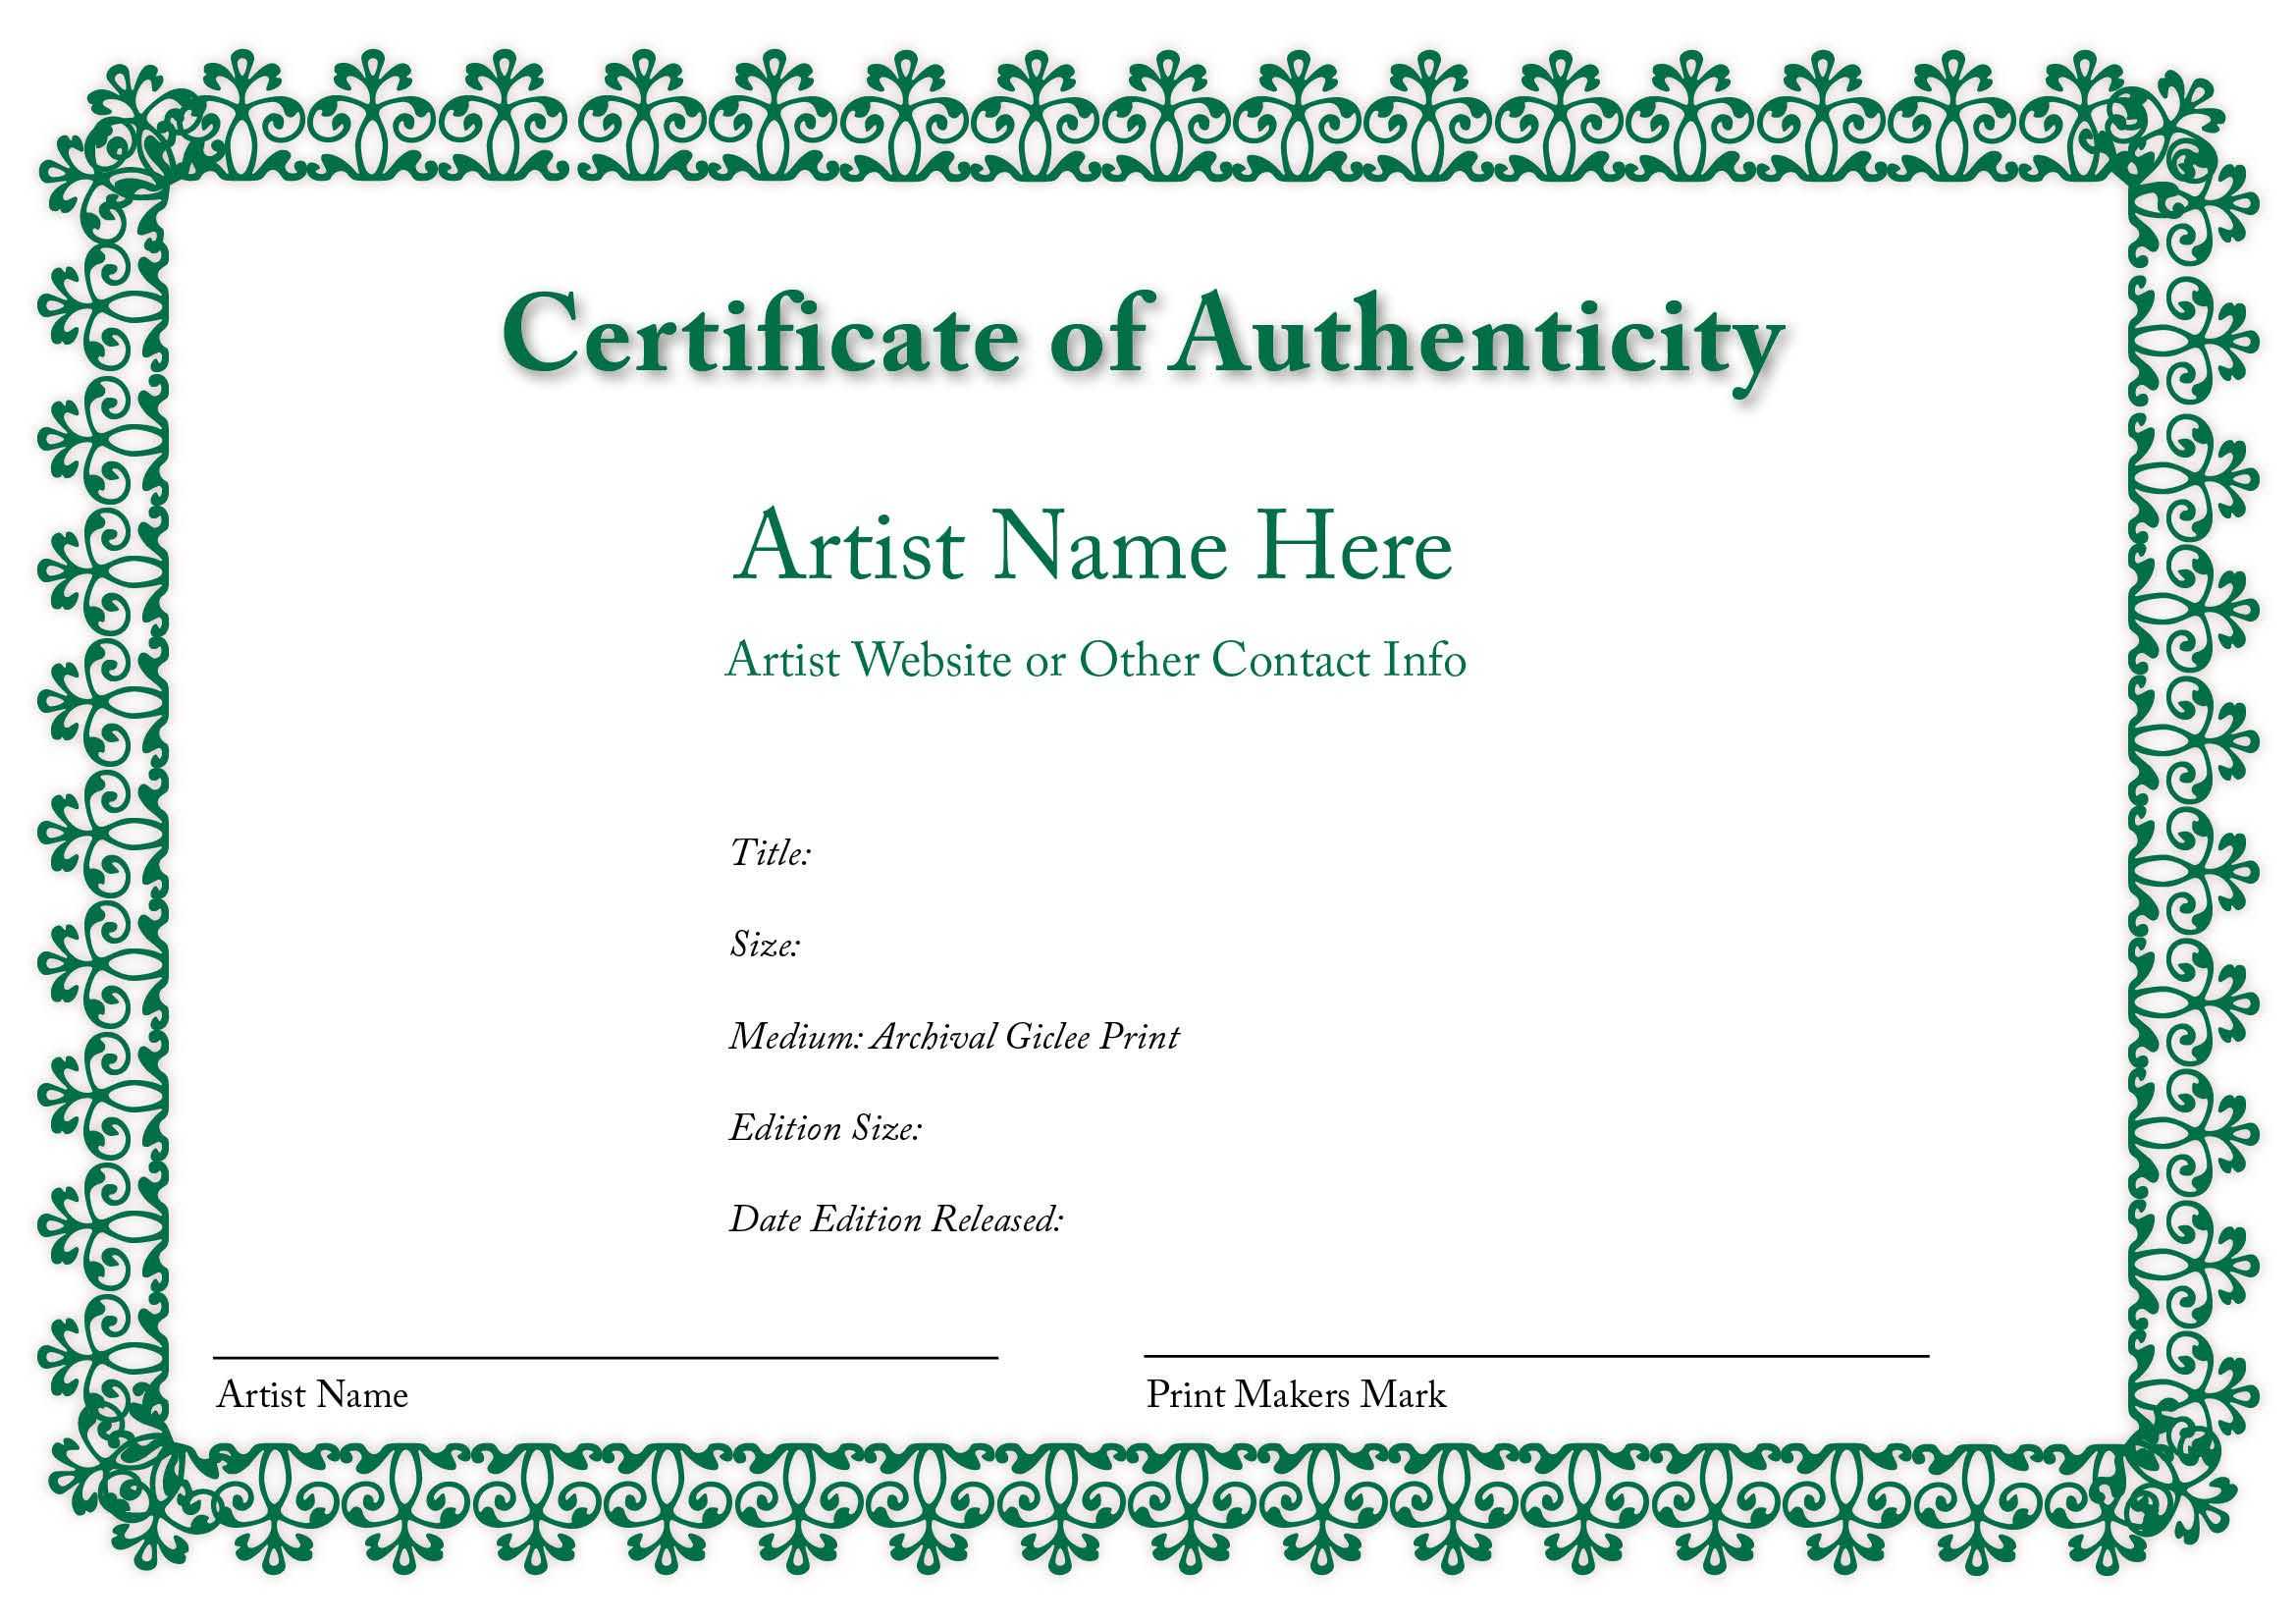 Certificate Of Authenticity Of An Art Print In 2019 With Certificate Of Authenticity Photography Template